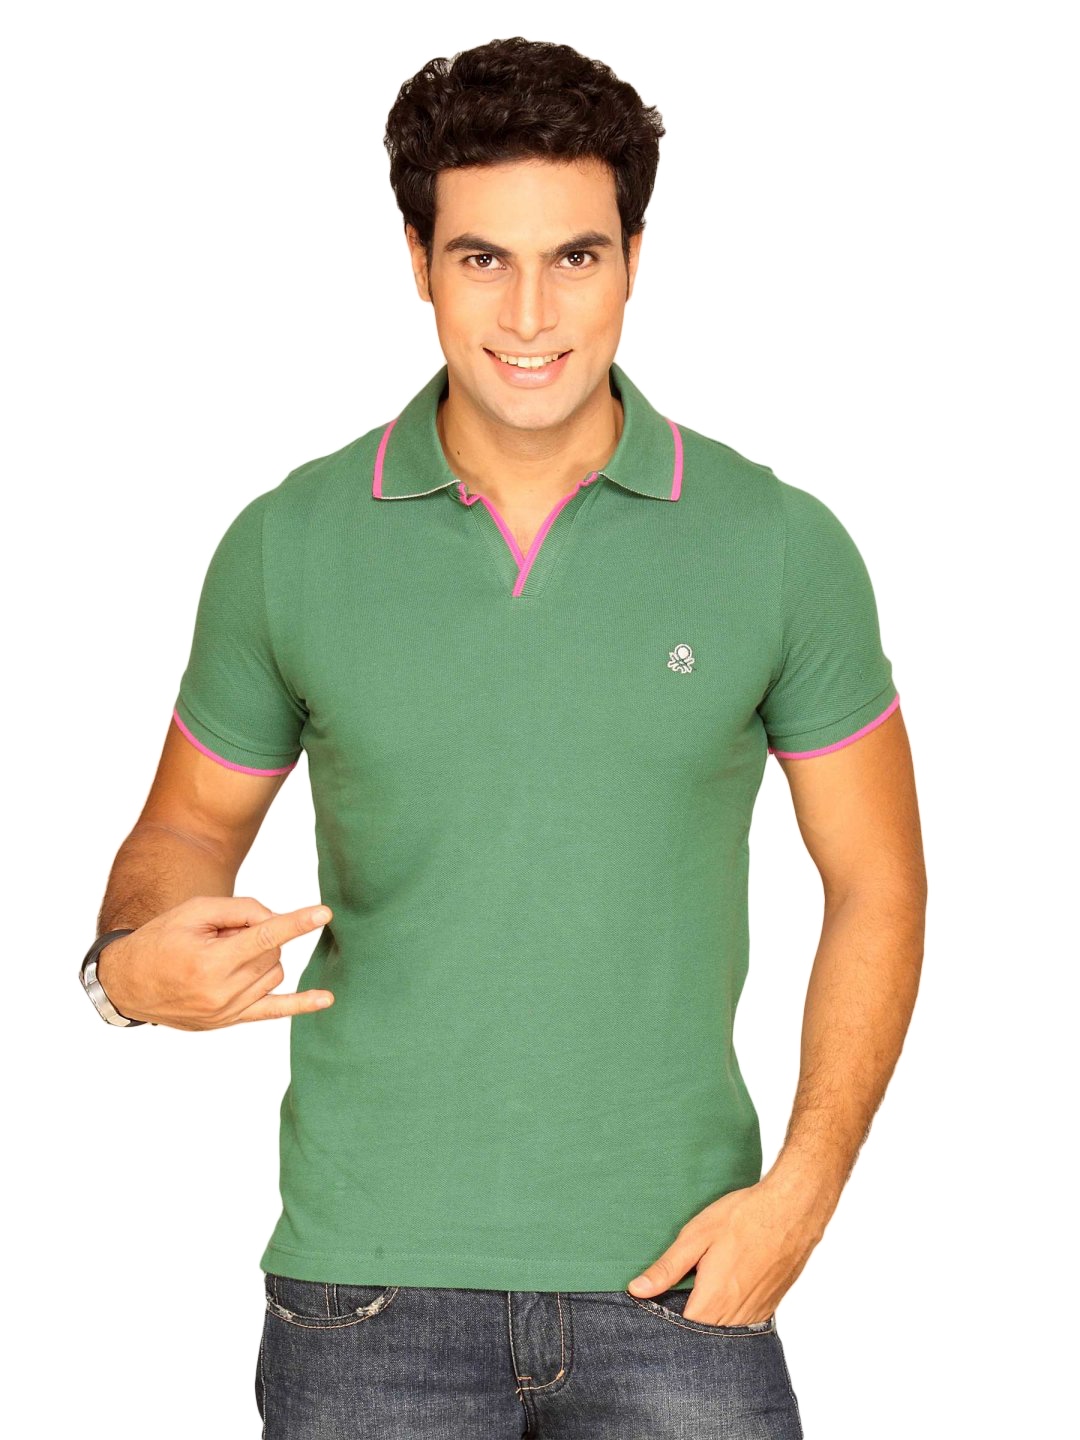 UCB Men's Johny Collar With Two Tone Green T-shirt